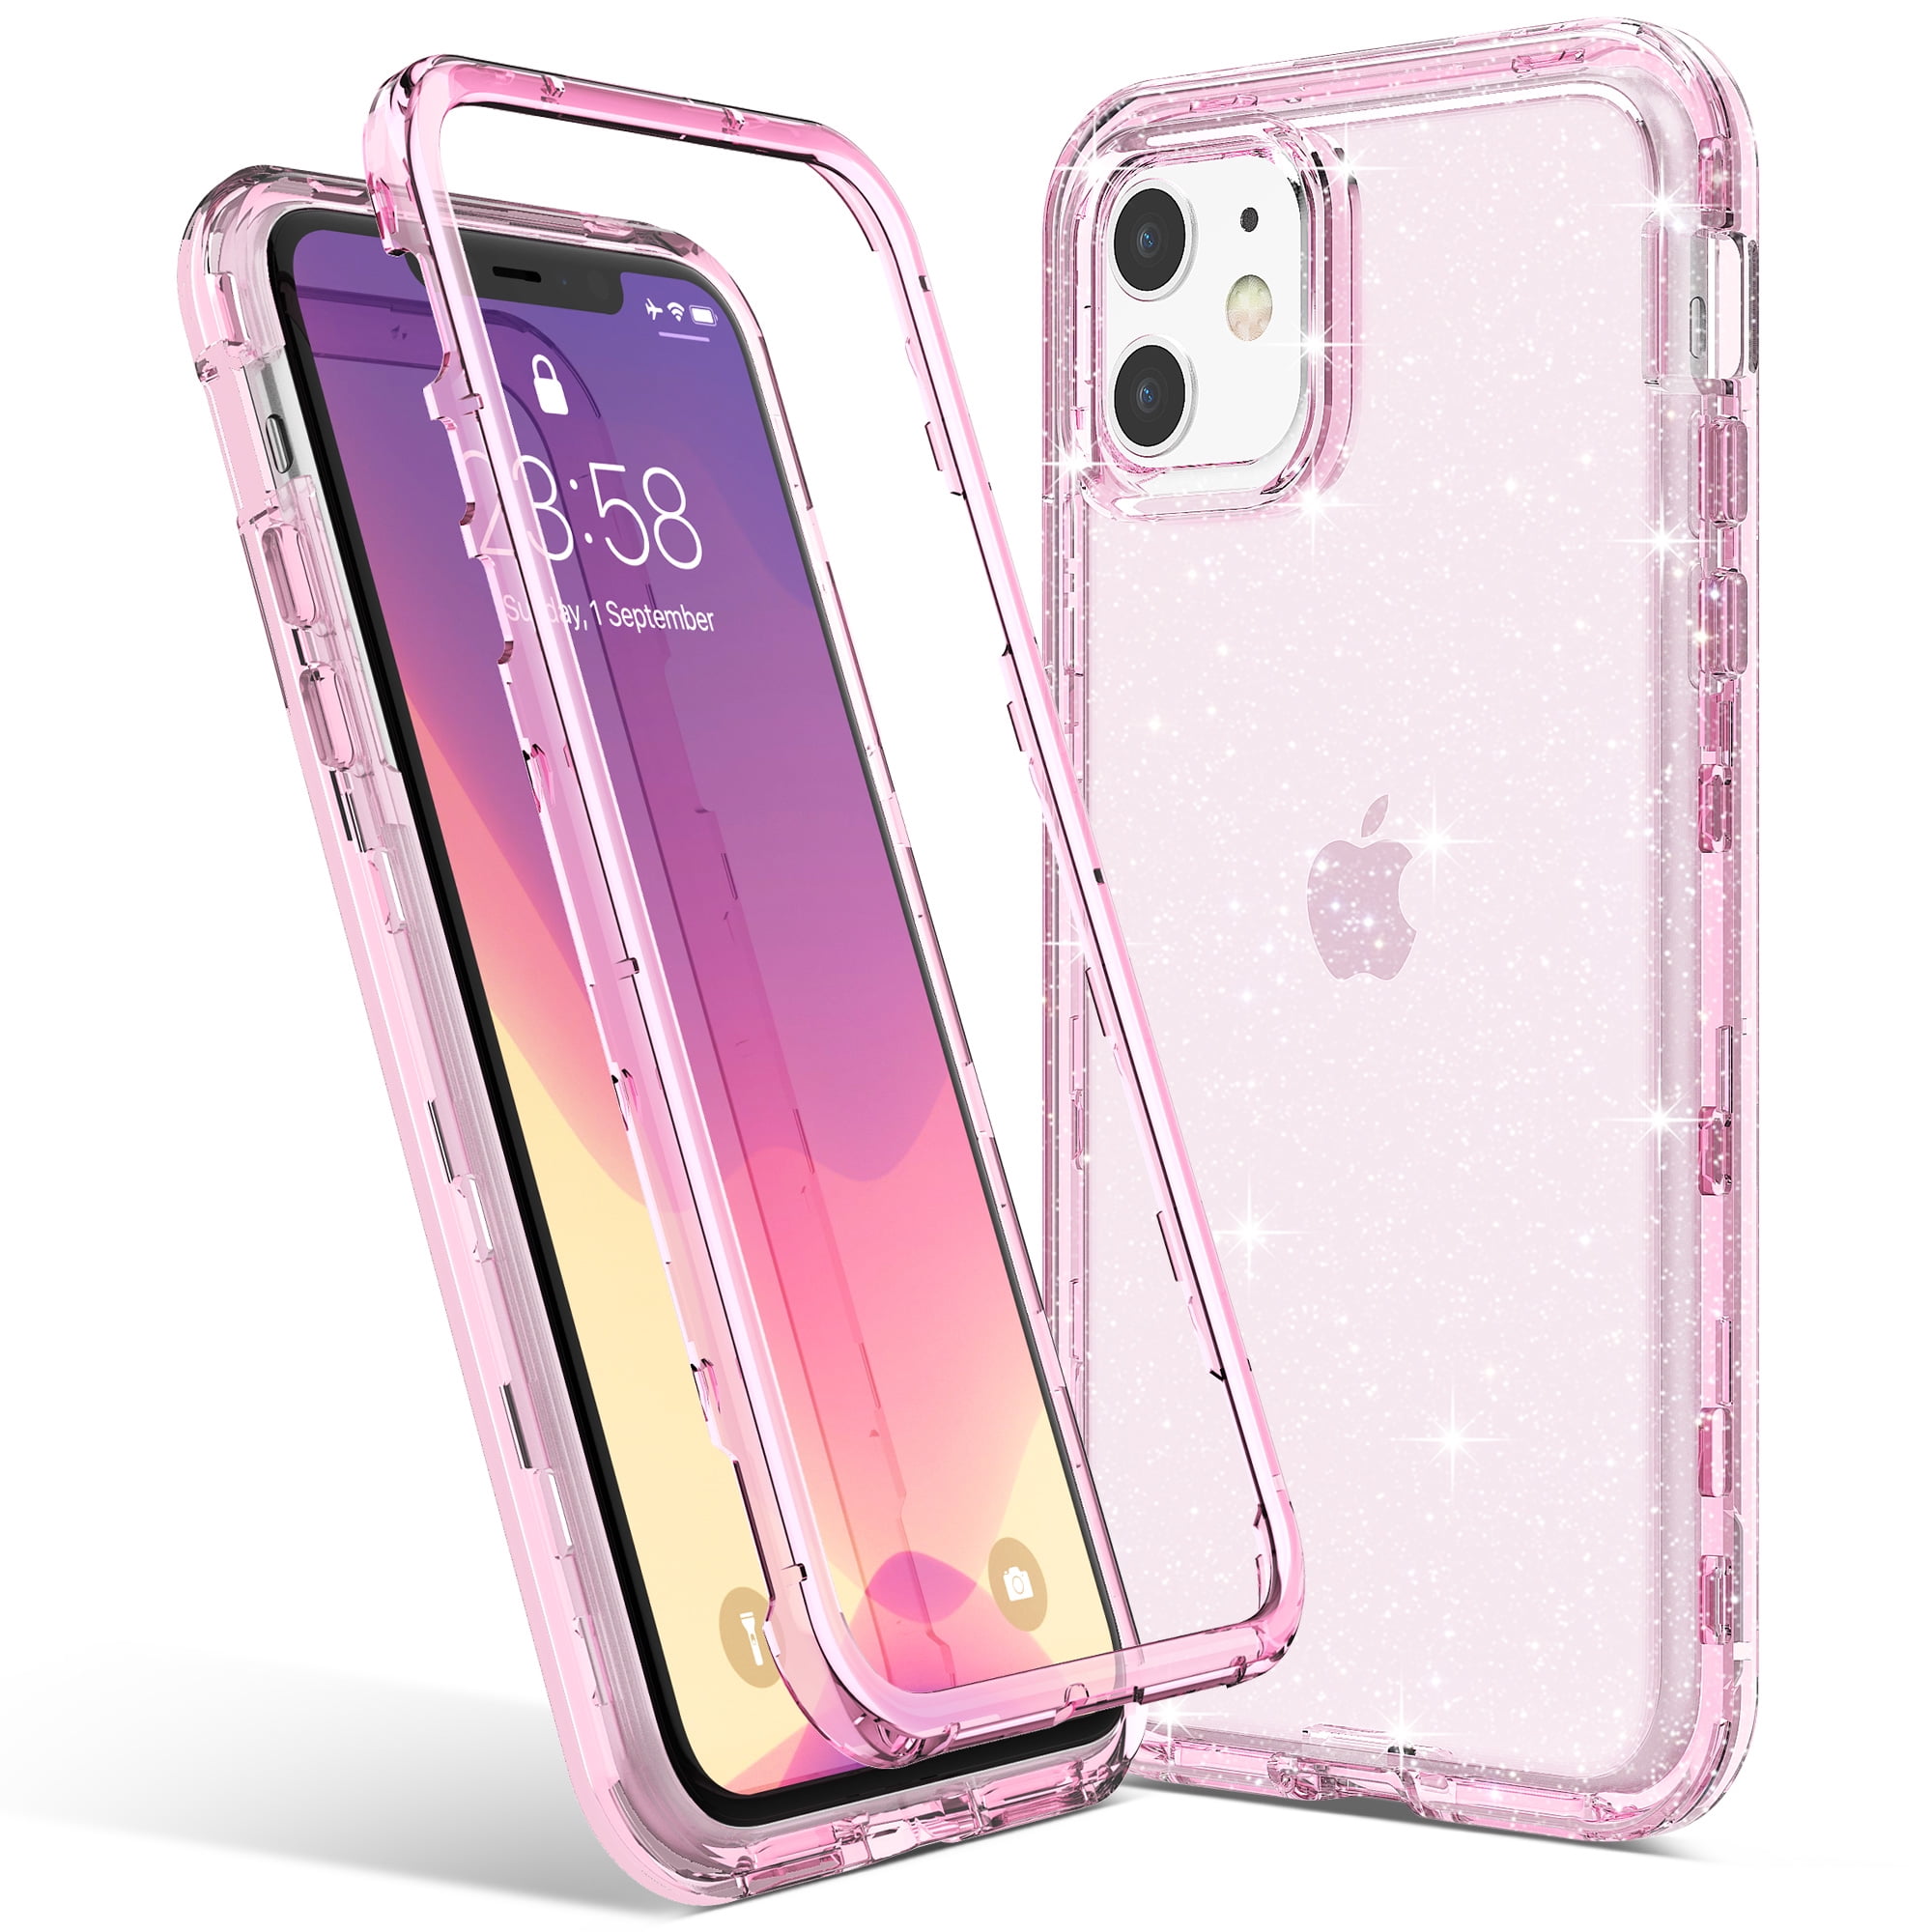 Iphone 11 Case Ulak Clear Glitter Protective Heavy Duty Shockproof Rugged Protection Case Soft Tpu Bumper Phone Cover Designed For Apple Iphone 11 6 1 Inch Clear Glitter Walmart Com Walmart Com